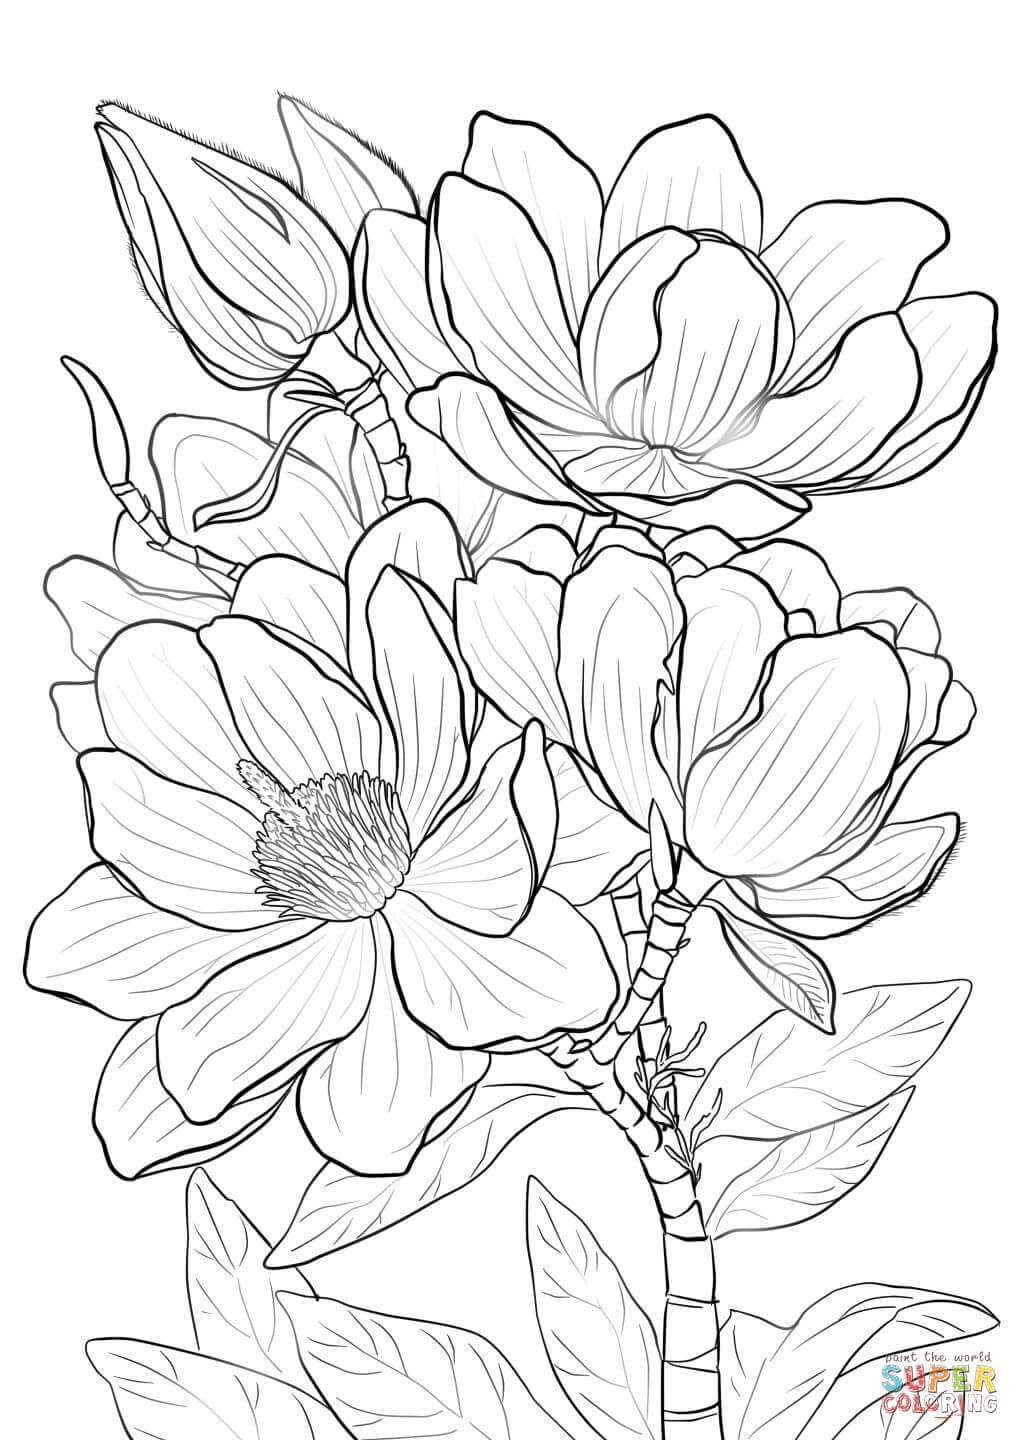 Campbells Magnolia Coloring Pages